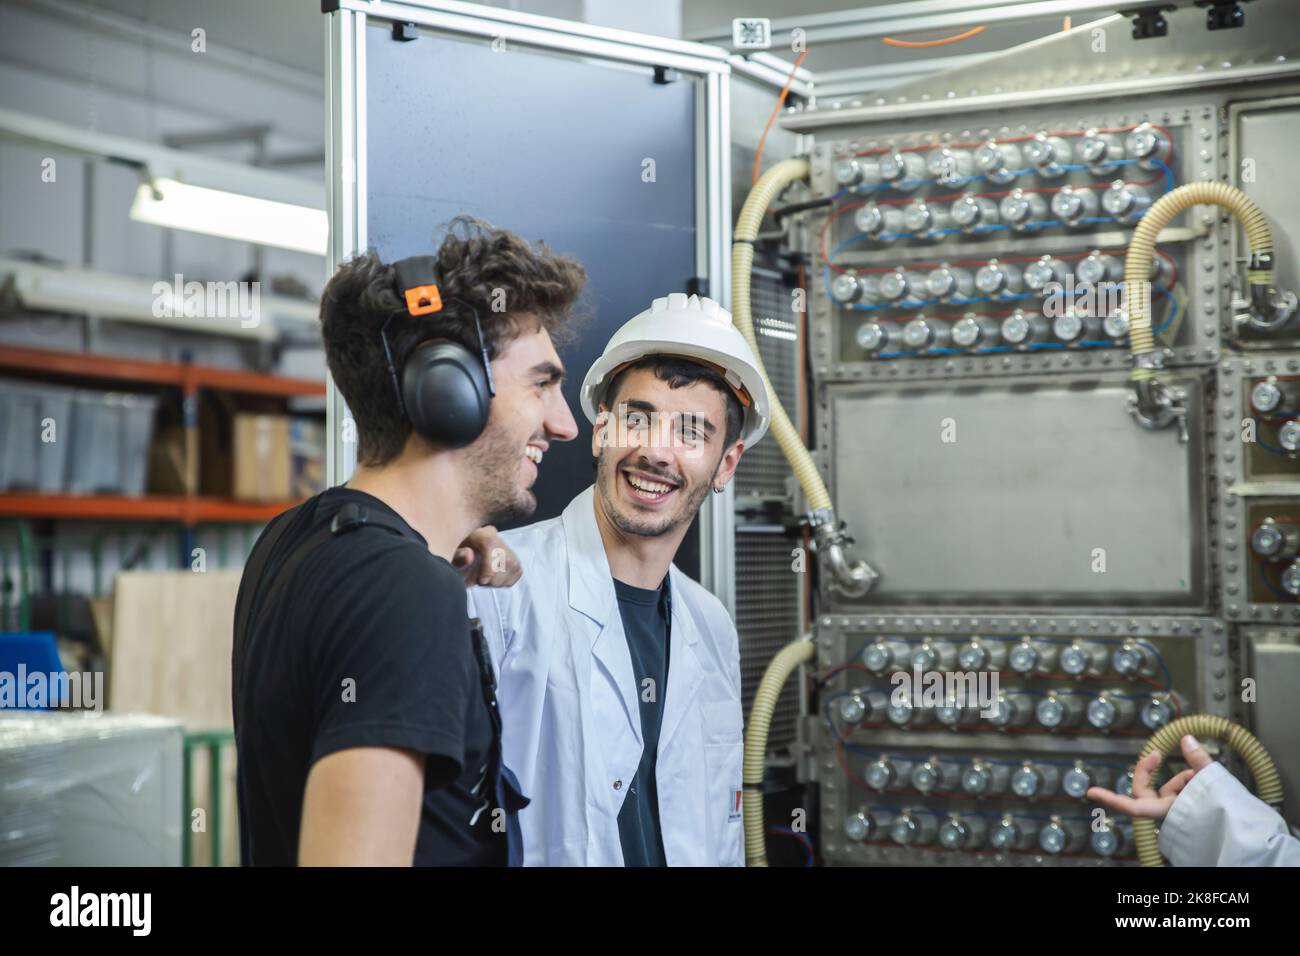 Technician talking with coworkers by production line in factory Stock Photo